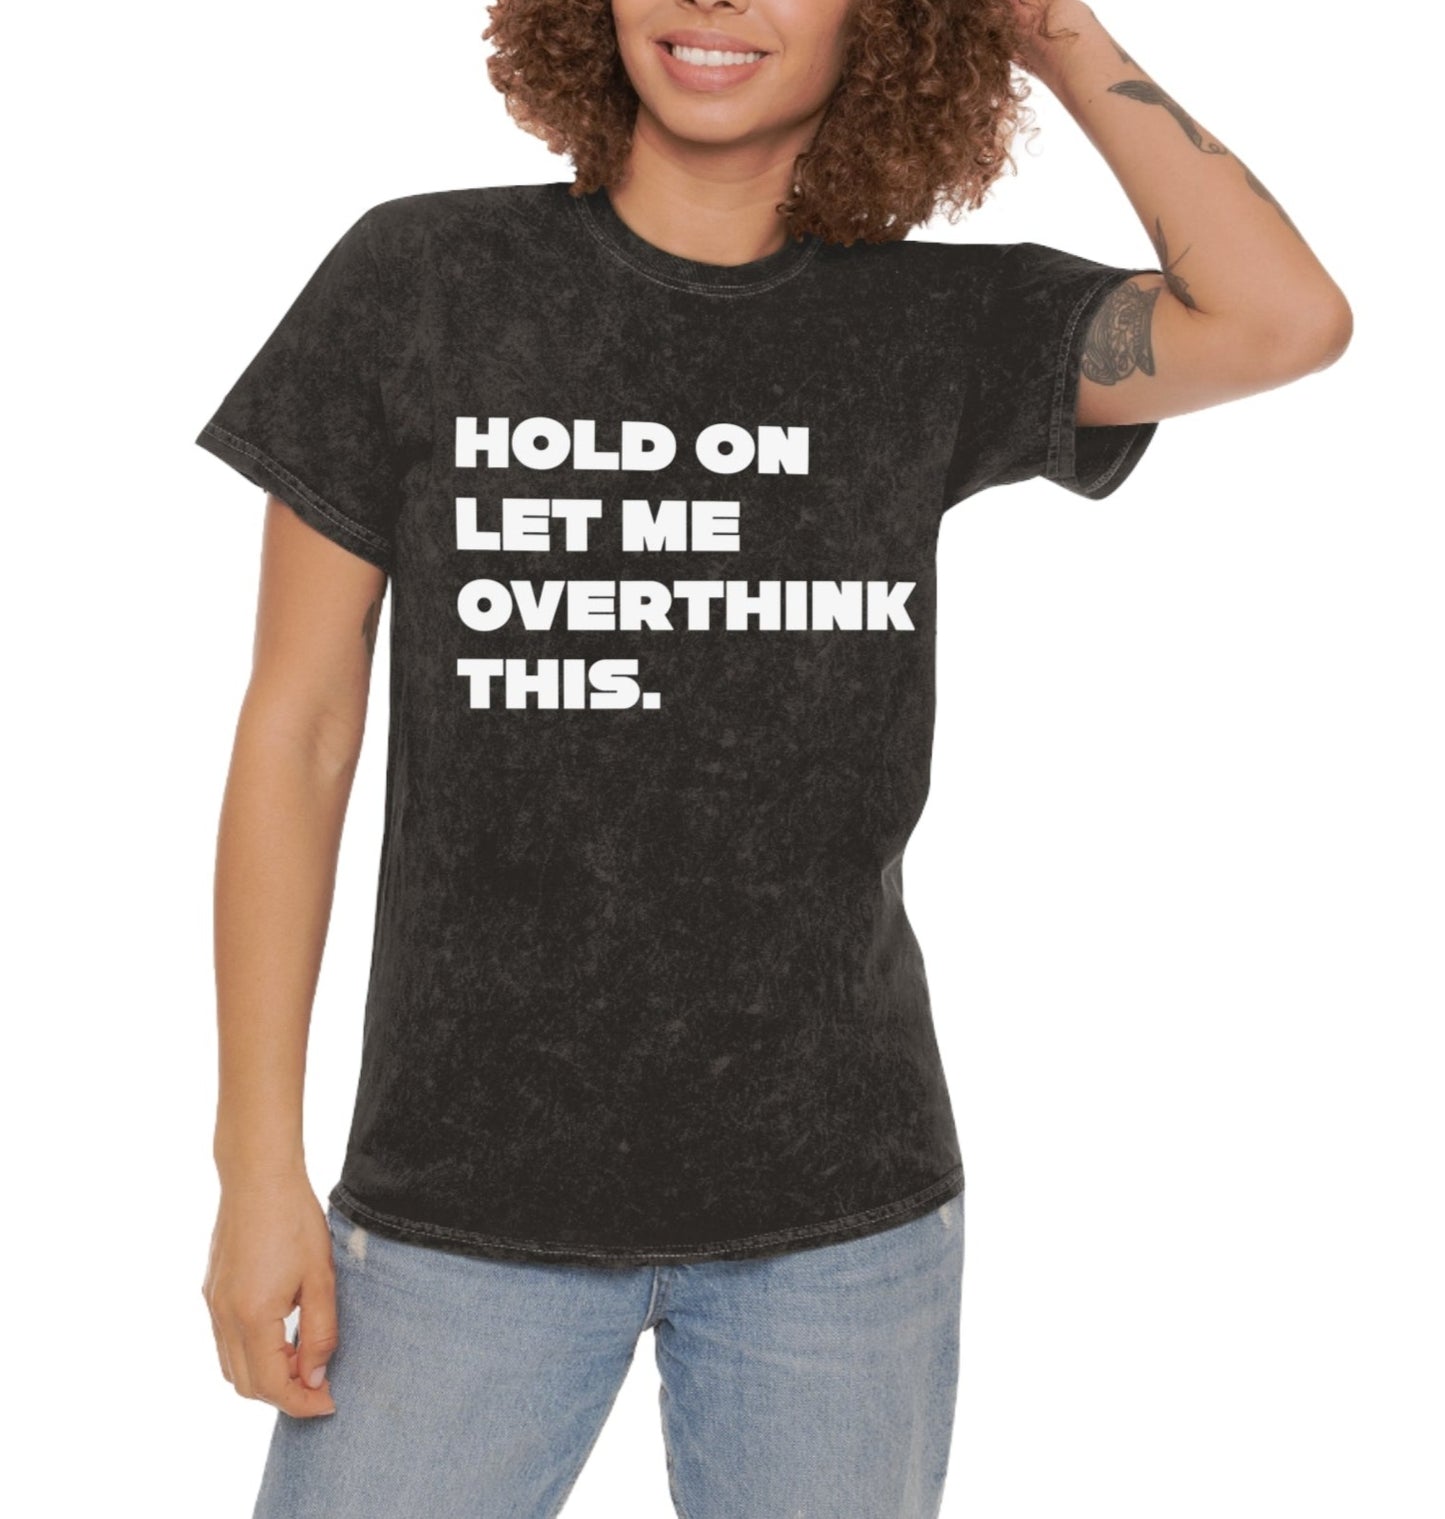 Hold On Let Me Overthink This. Unisex T-Shirt